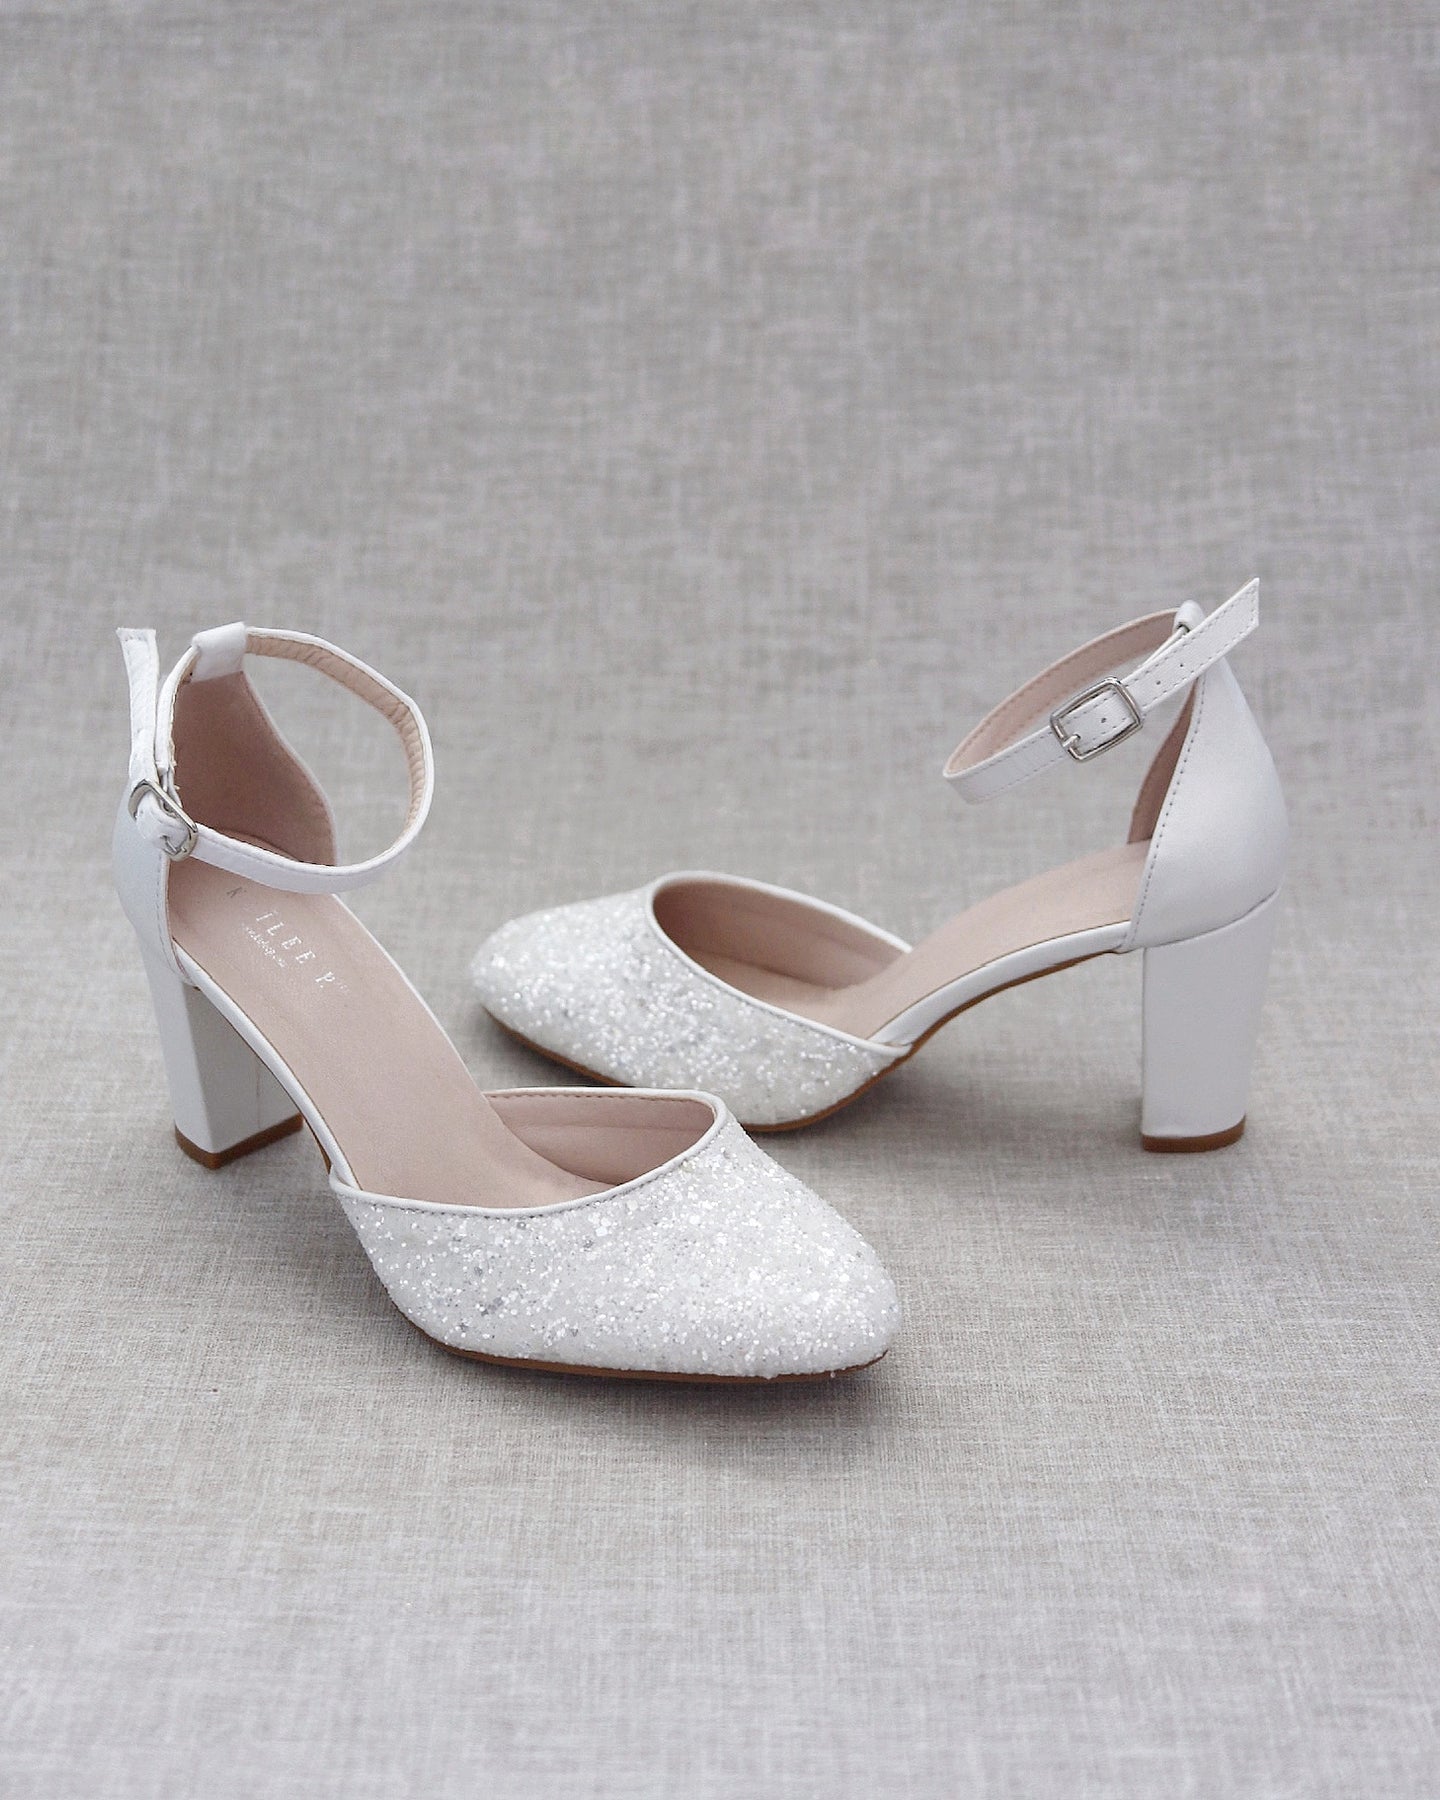 Silver Drilled Toe Stiletto Heels With Ankle Strap | LizProm